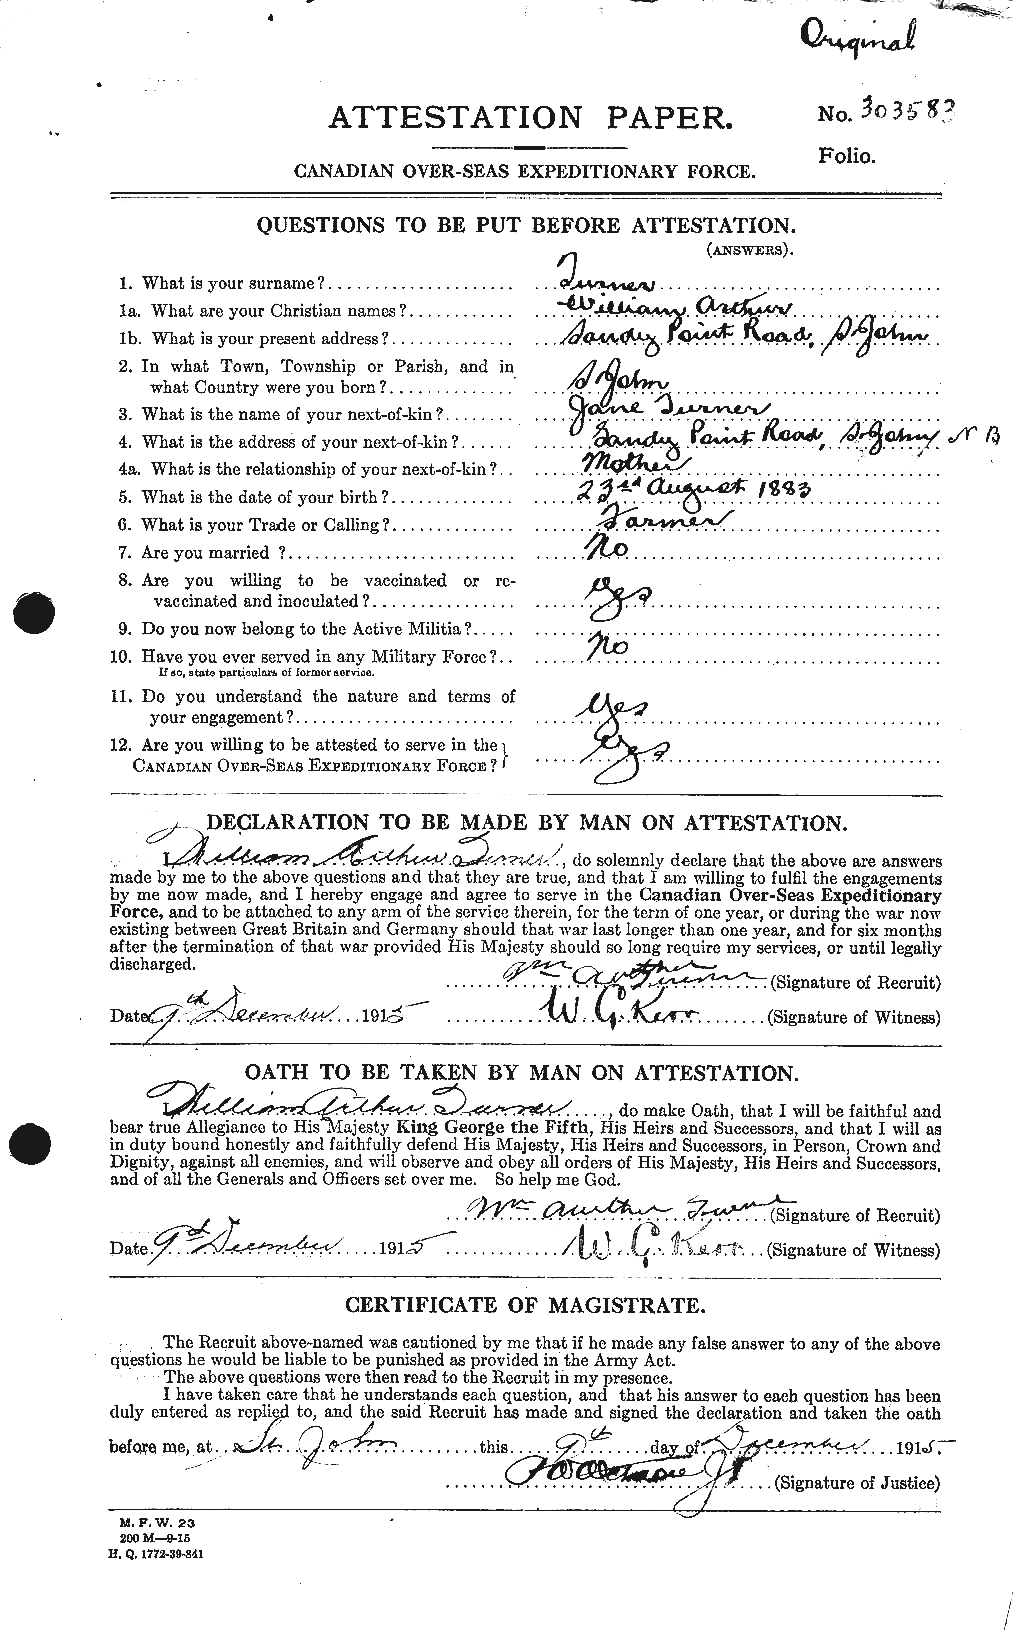 Personnel Records of the First World War - CEF 644008a